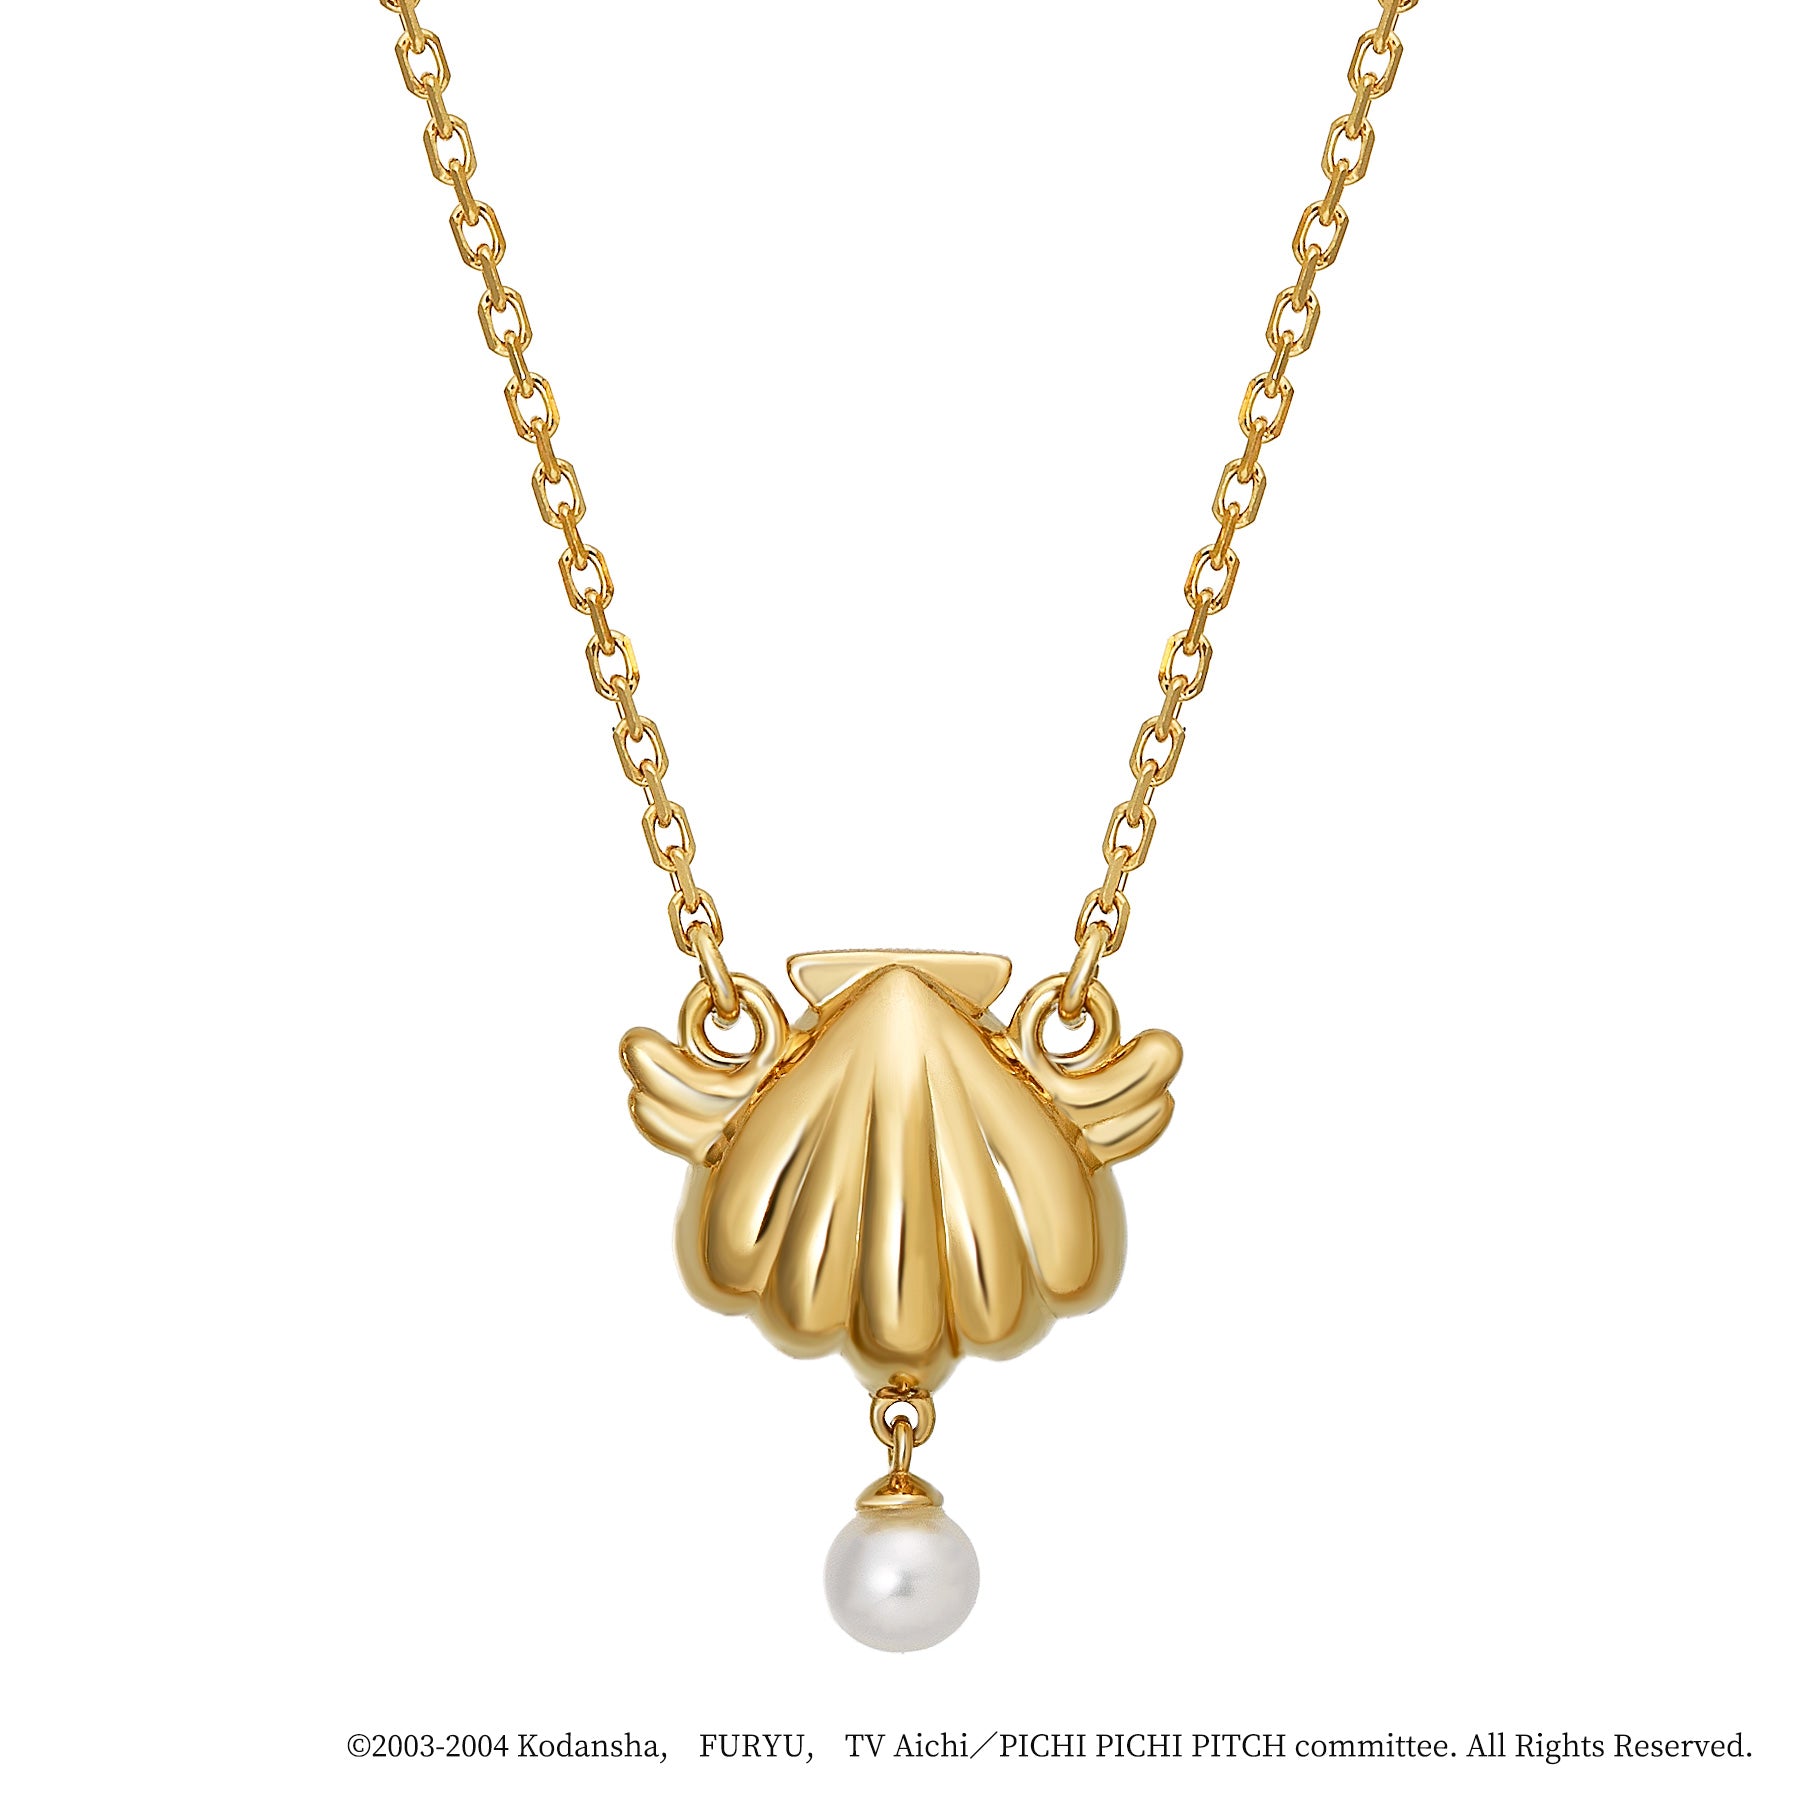 Mermaid Melody Pichi Pichi Pitch - Reversible Necklace (Noel) - Product Image